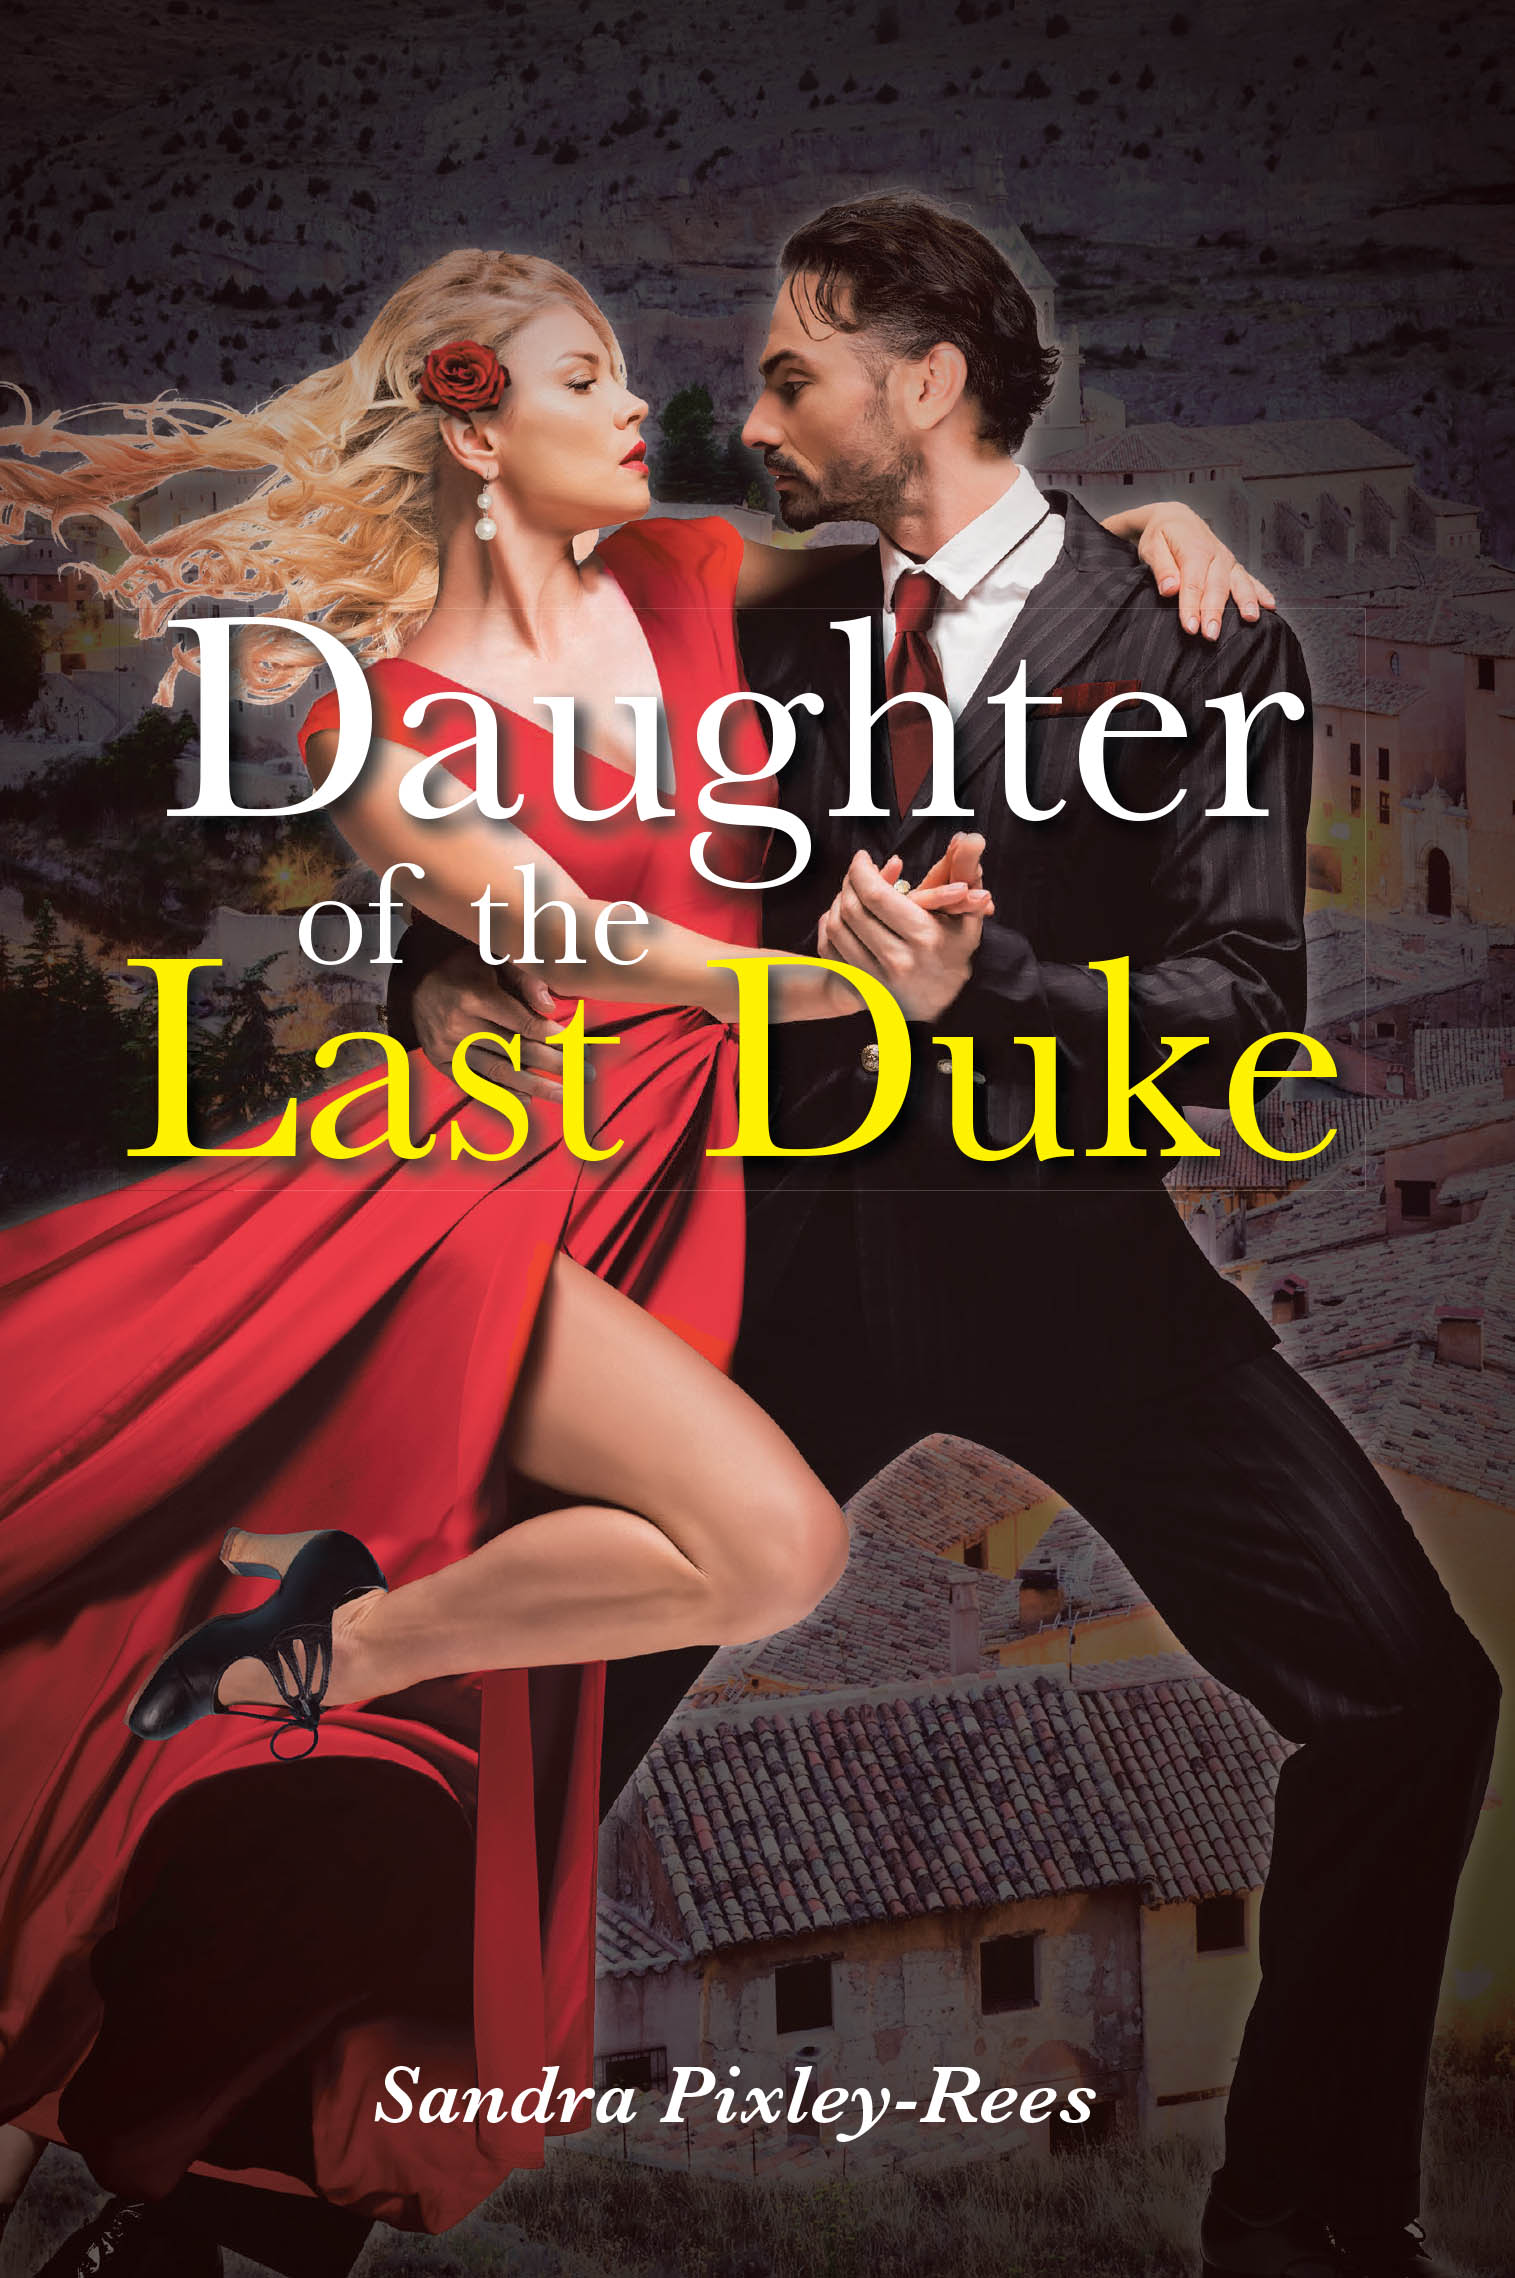 Author Sandra Pixley-Rees’s New Book, "Daughter of the Last Duke," is a Historical Fiction of a Young Woman’s Journey of Courage, Survival, and Personal Sacrifice